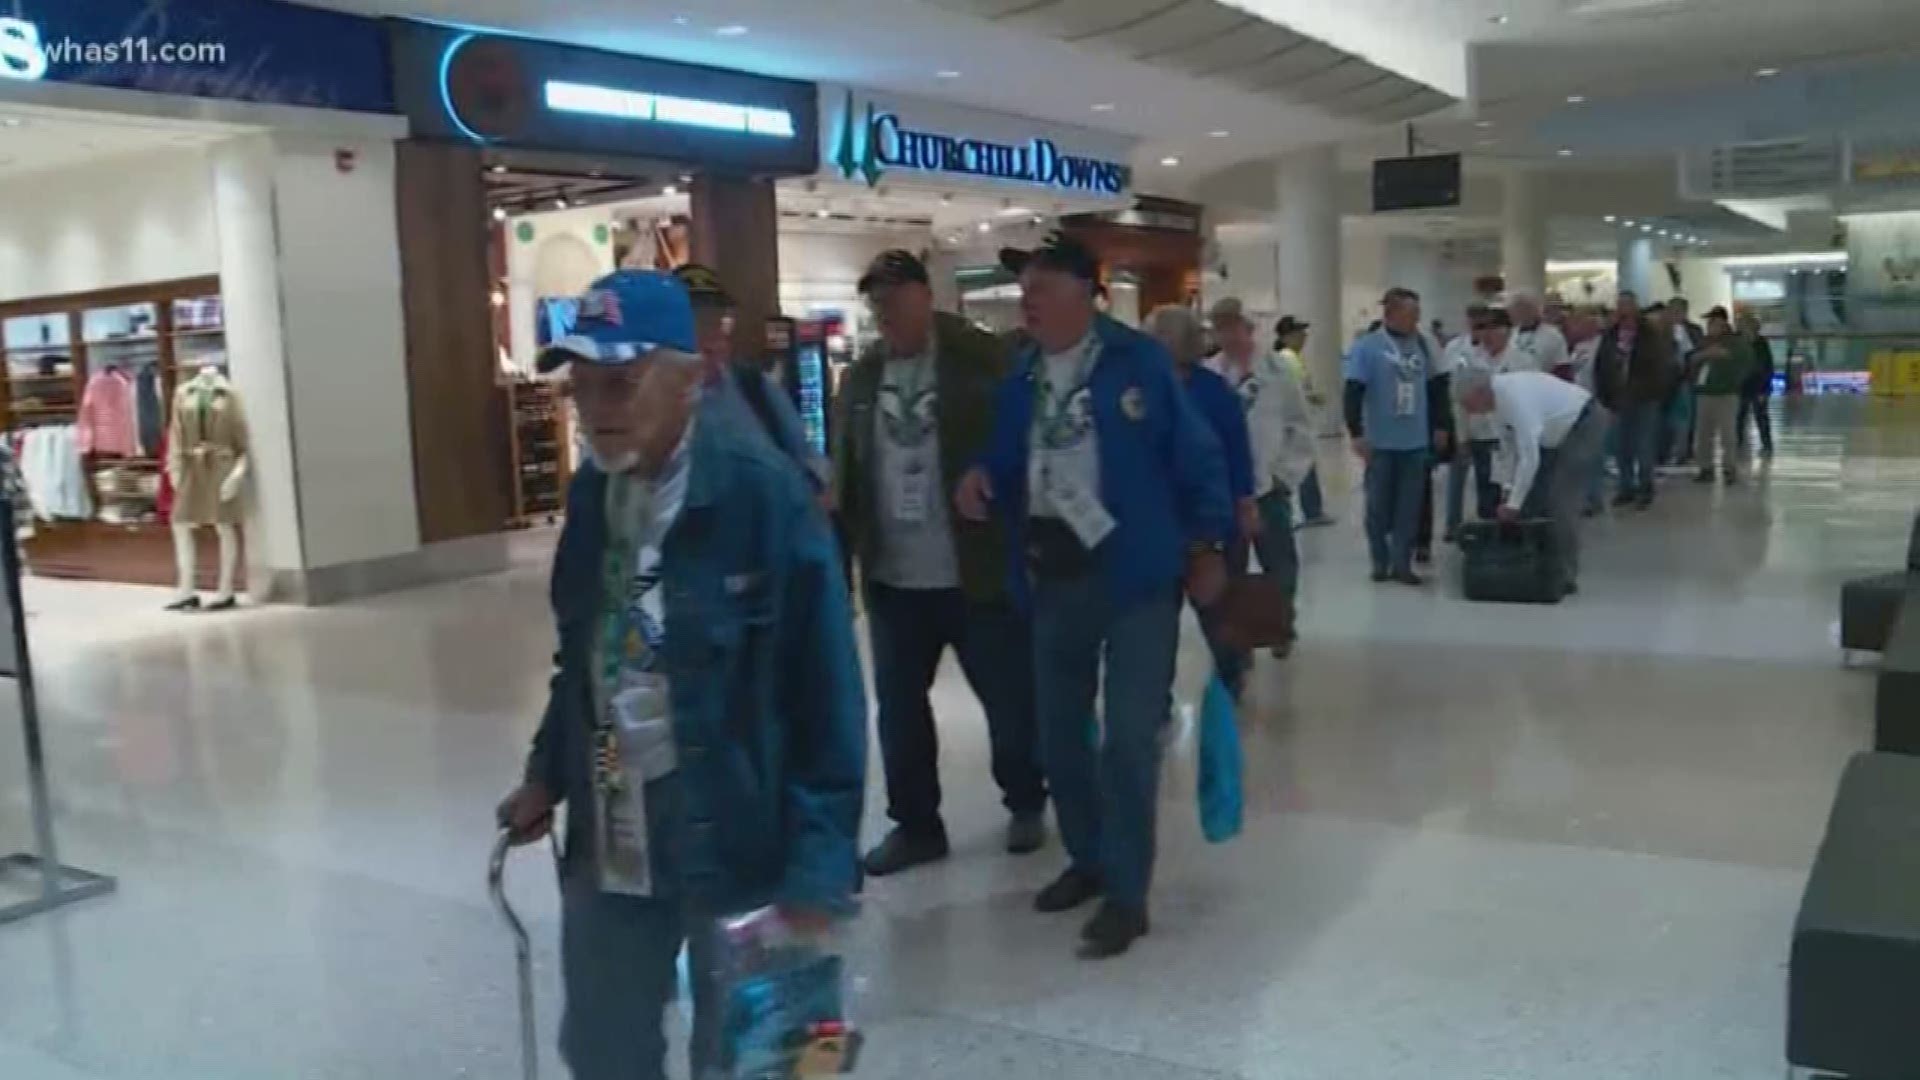 110 veterans are being flown back to Louisville on Wednesday and you can welcome them home.